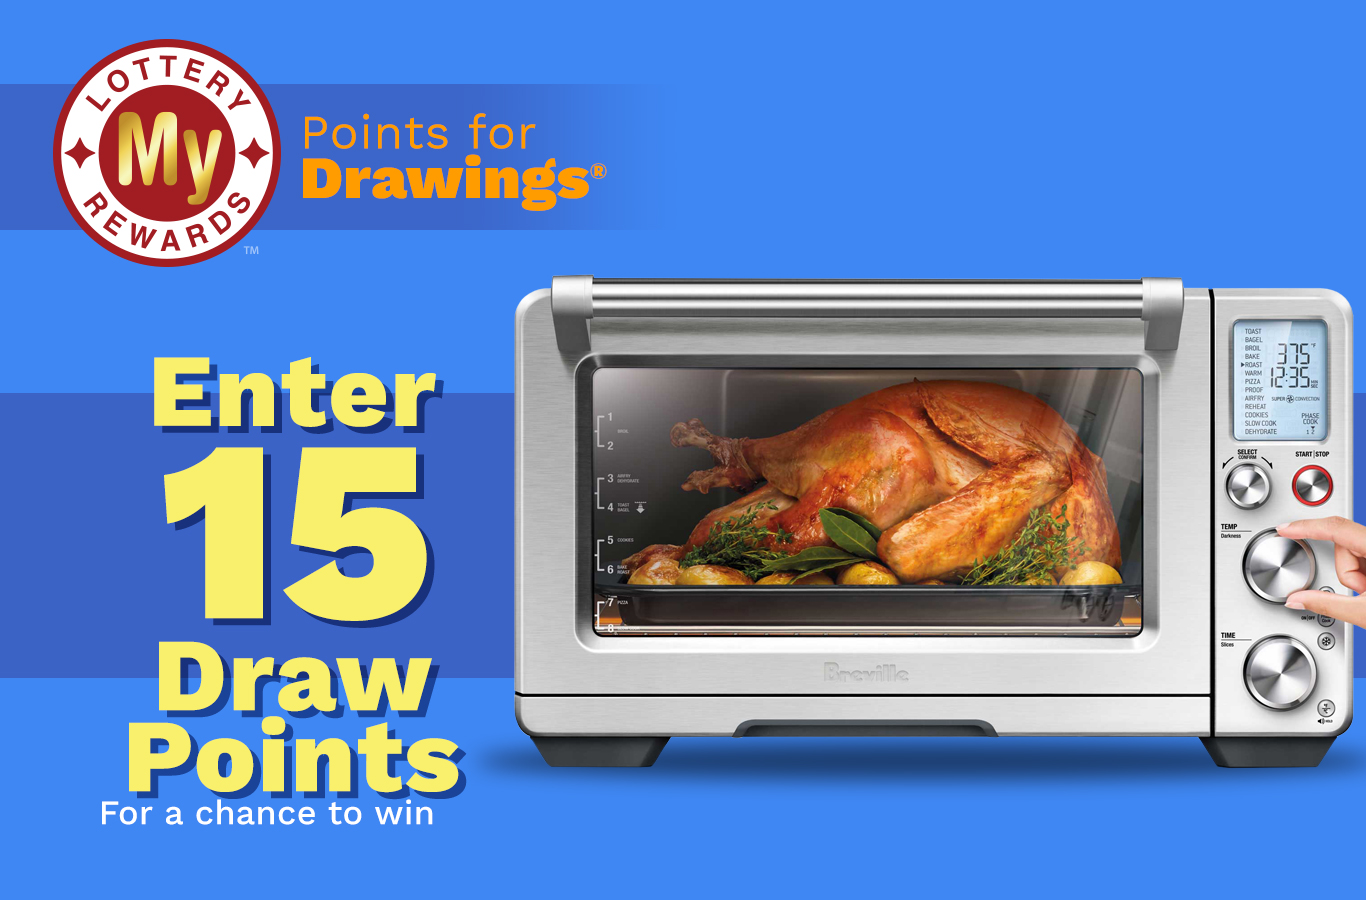 Here's your chance to win a Smart Oven! Enter by Monday, February 7th.